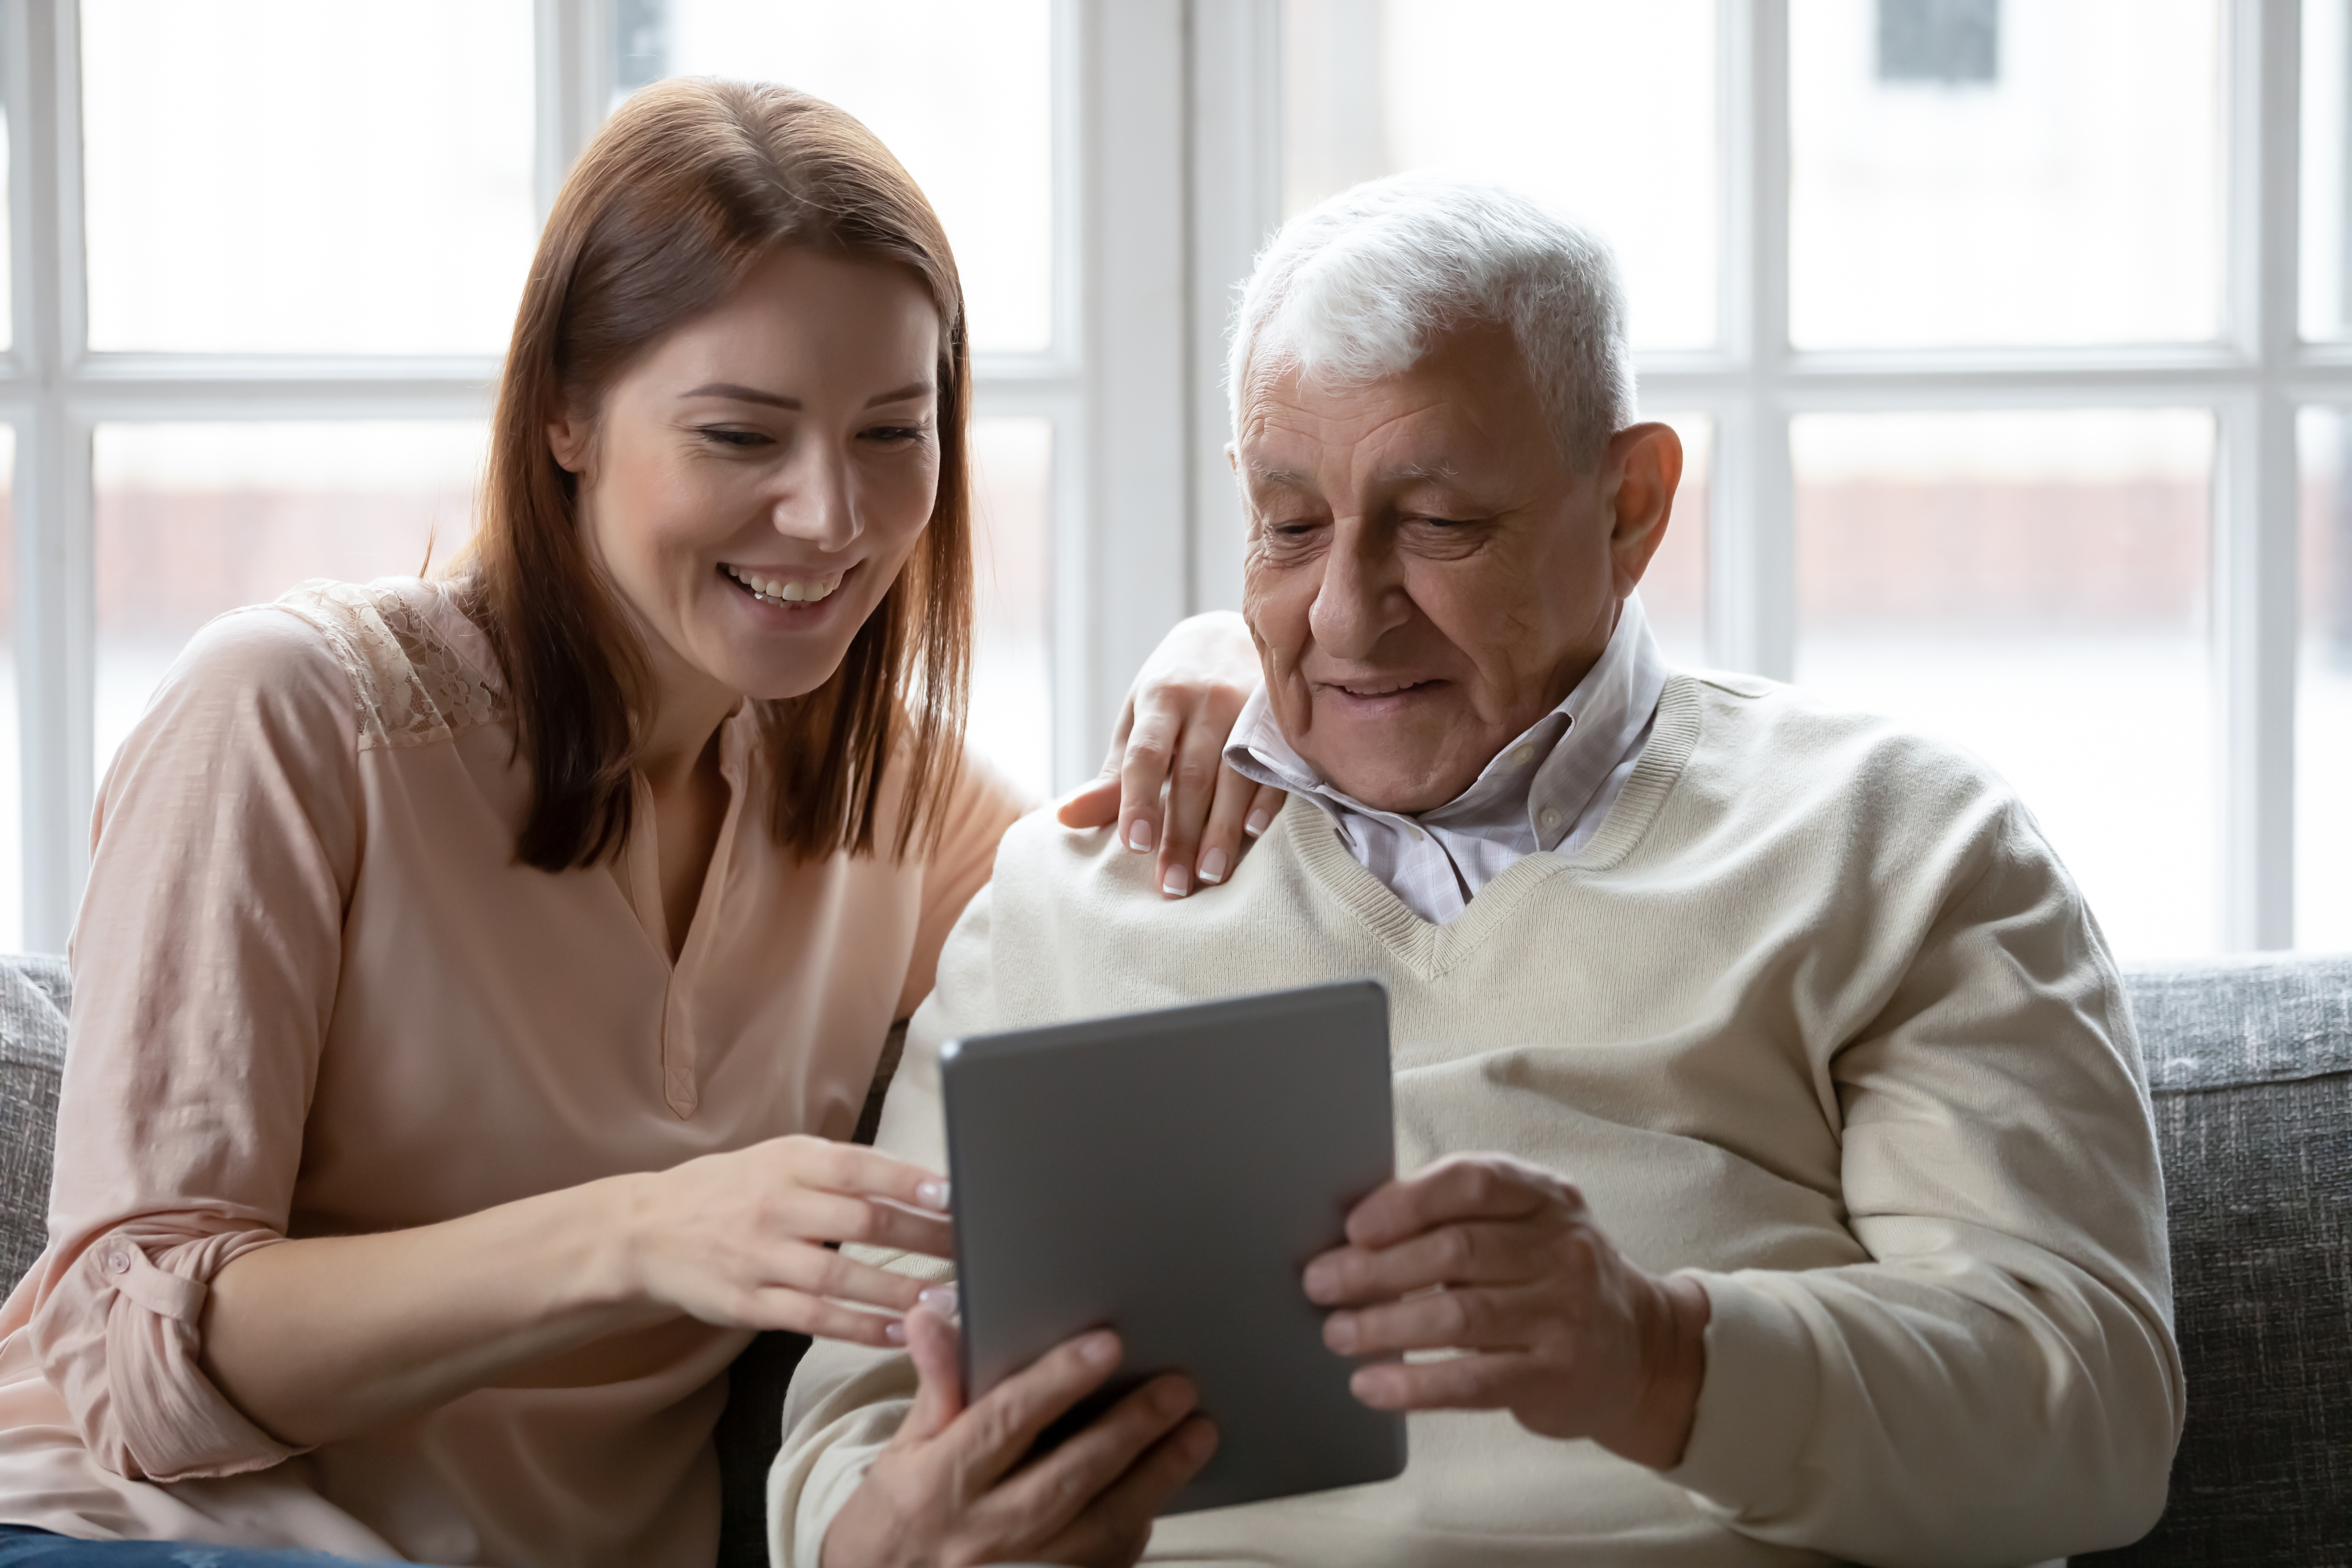 An old man holding a digital tablet with a young woman sat next to him. The woman is pointing at the tablet and appears to be supporting him.